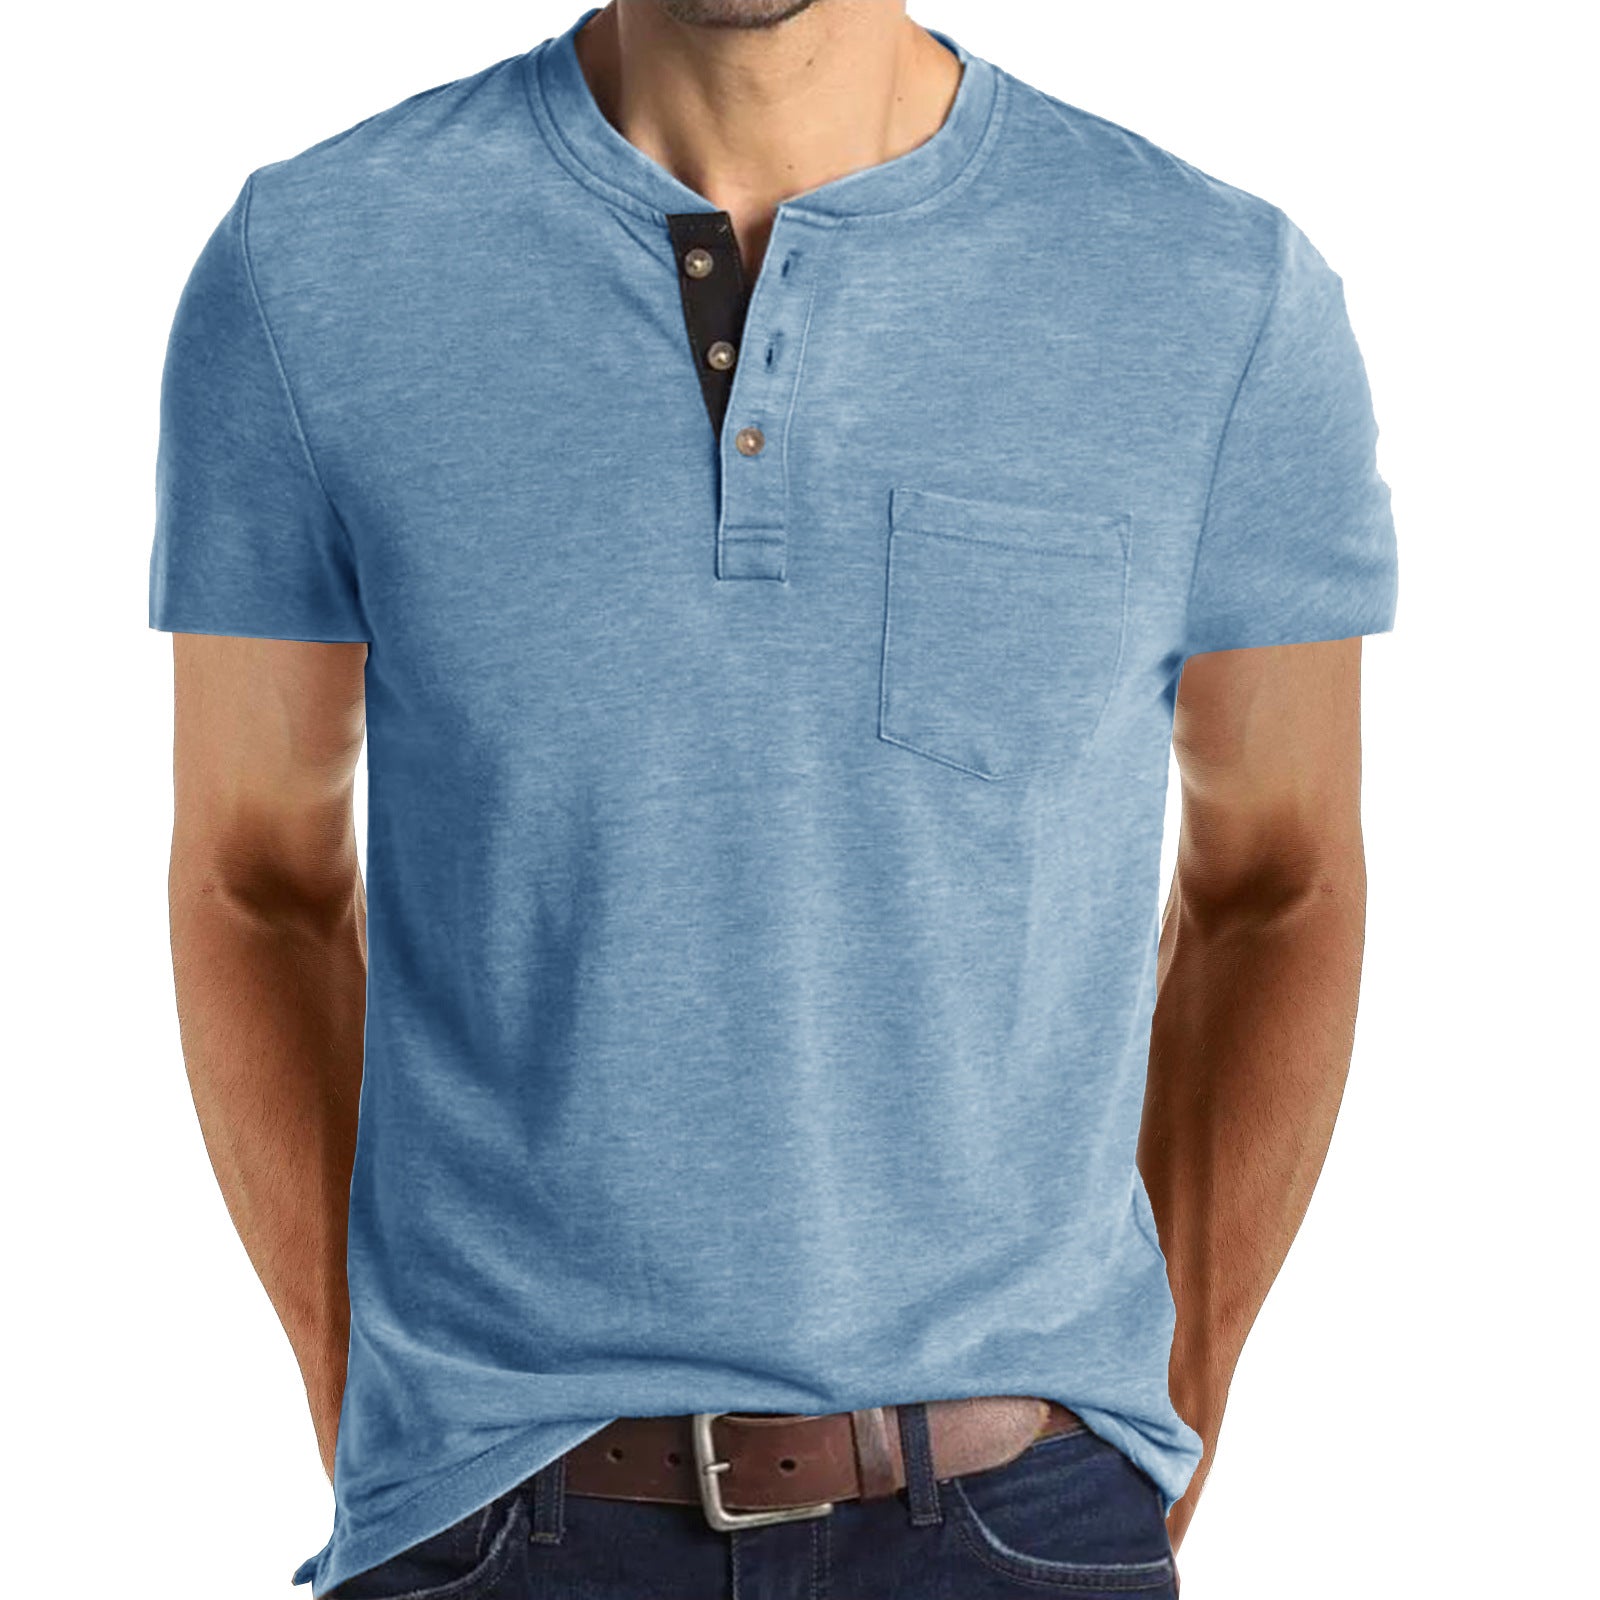 Men's Henley Button Cotton T-shirts With Pocket